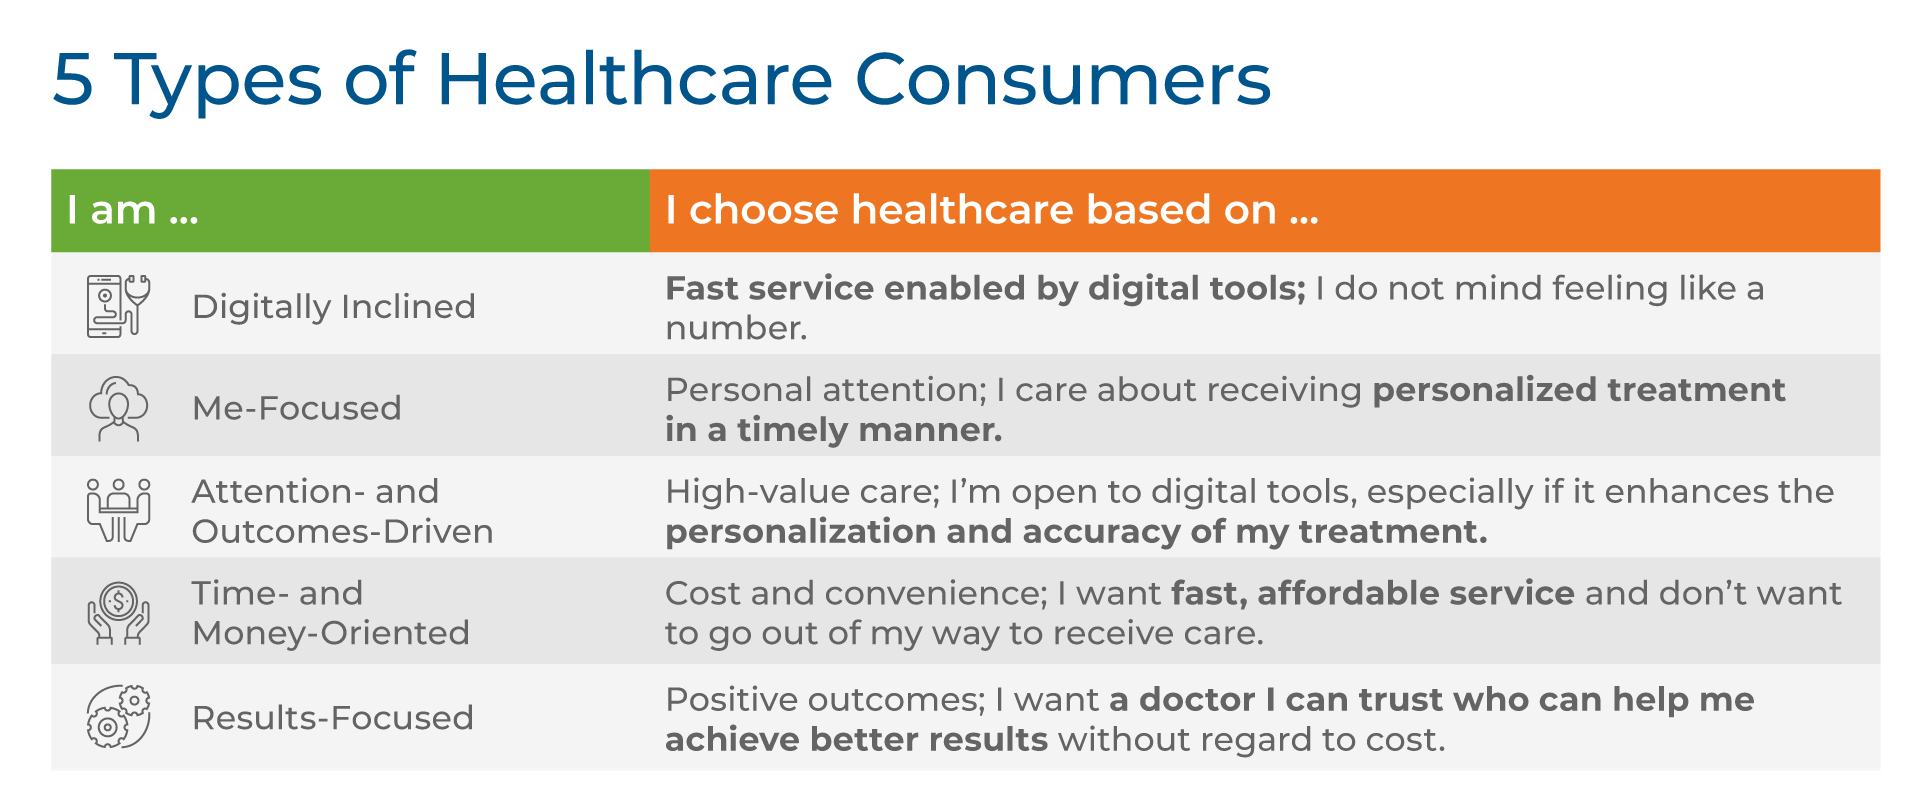 A table defining the five types of healthcare consumers. The digitally inclined consumer chooses healthcare based on fast service enabled by digital tools. The me-focused consumer chooses care based on timely, personalized attention. The attention- and outcomes-driven consumer values personalization and accuracy of treatment and is open to digital tools. The time- and money-oriented consumer seeks fast, affordable, and convenient service. And the results-focused consumer values results and a doctor they can trust.